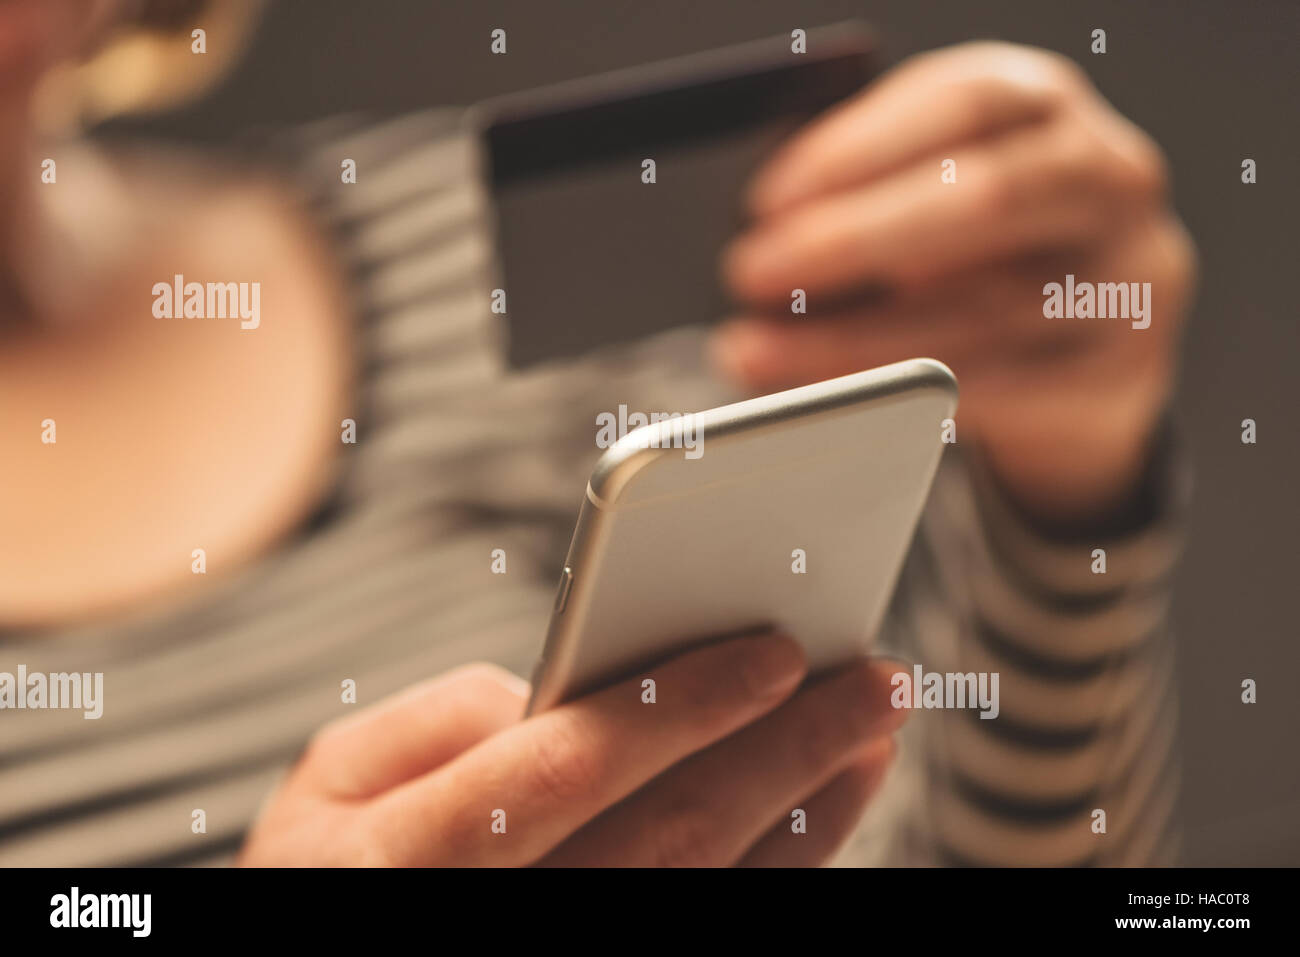 Woman using smartphone app to check e-wallet account balance, close up of hands with mobile phone and plastic credit card Stock Photo